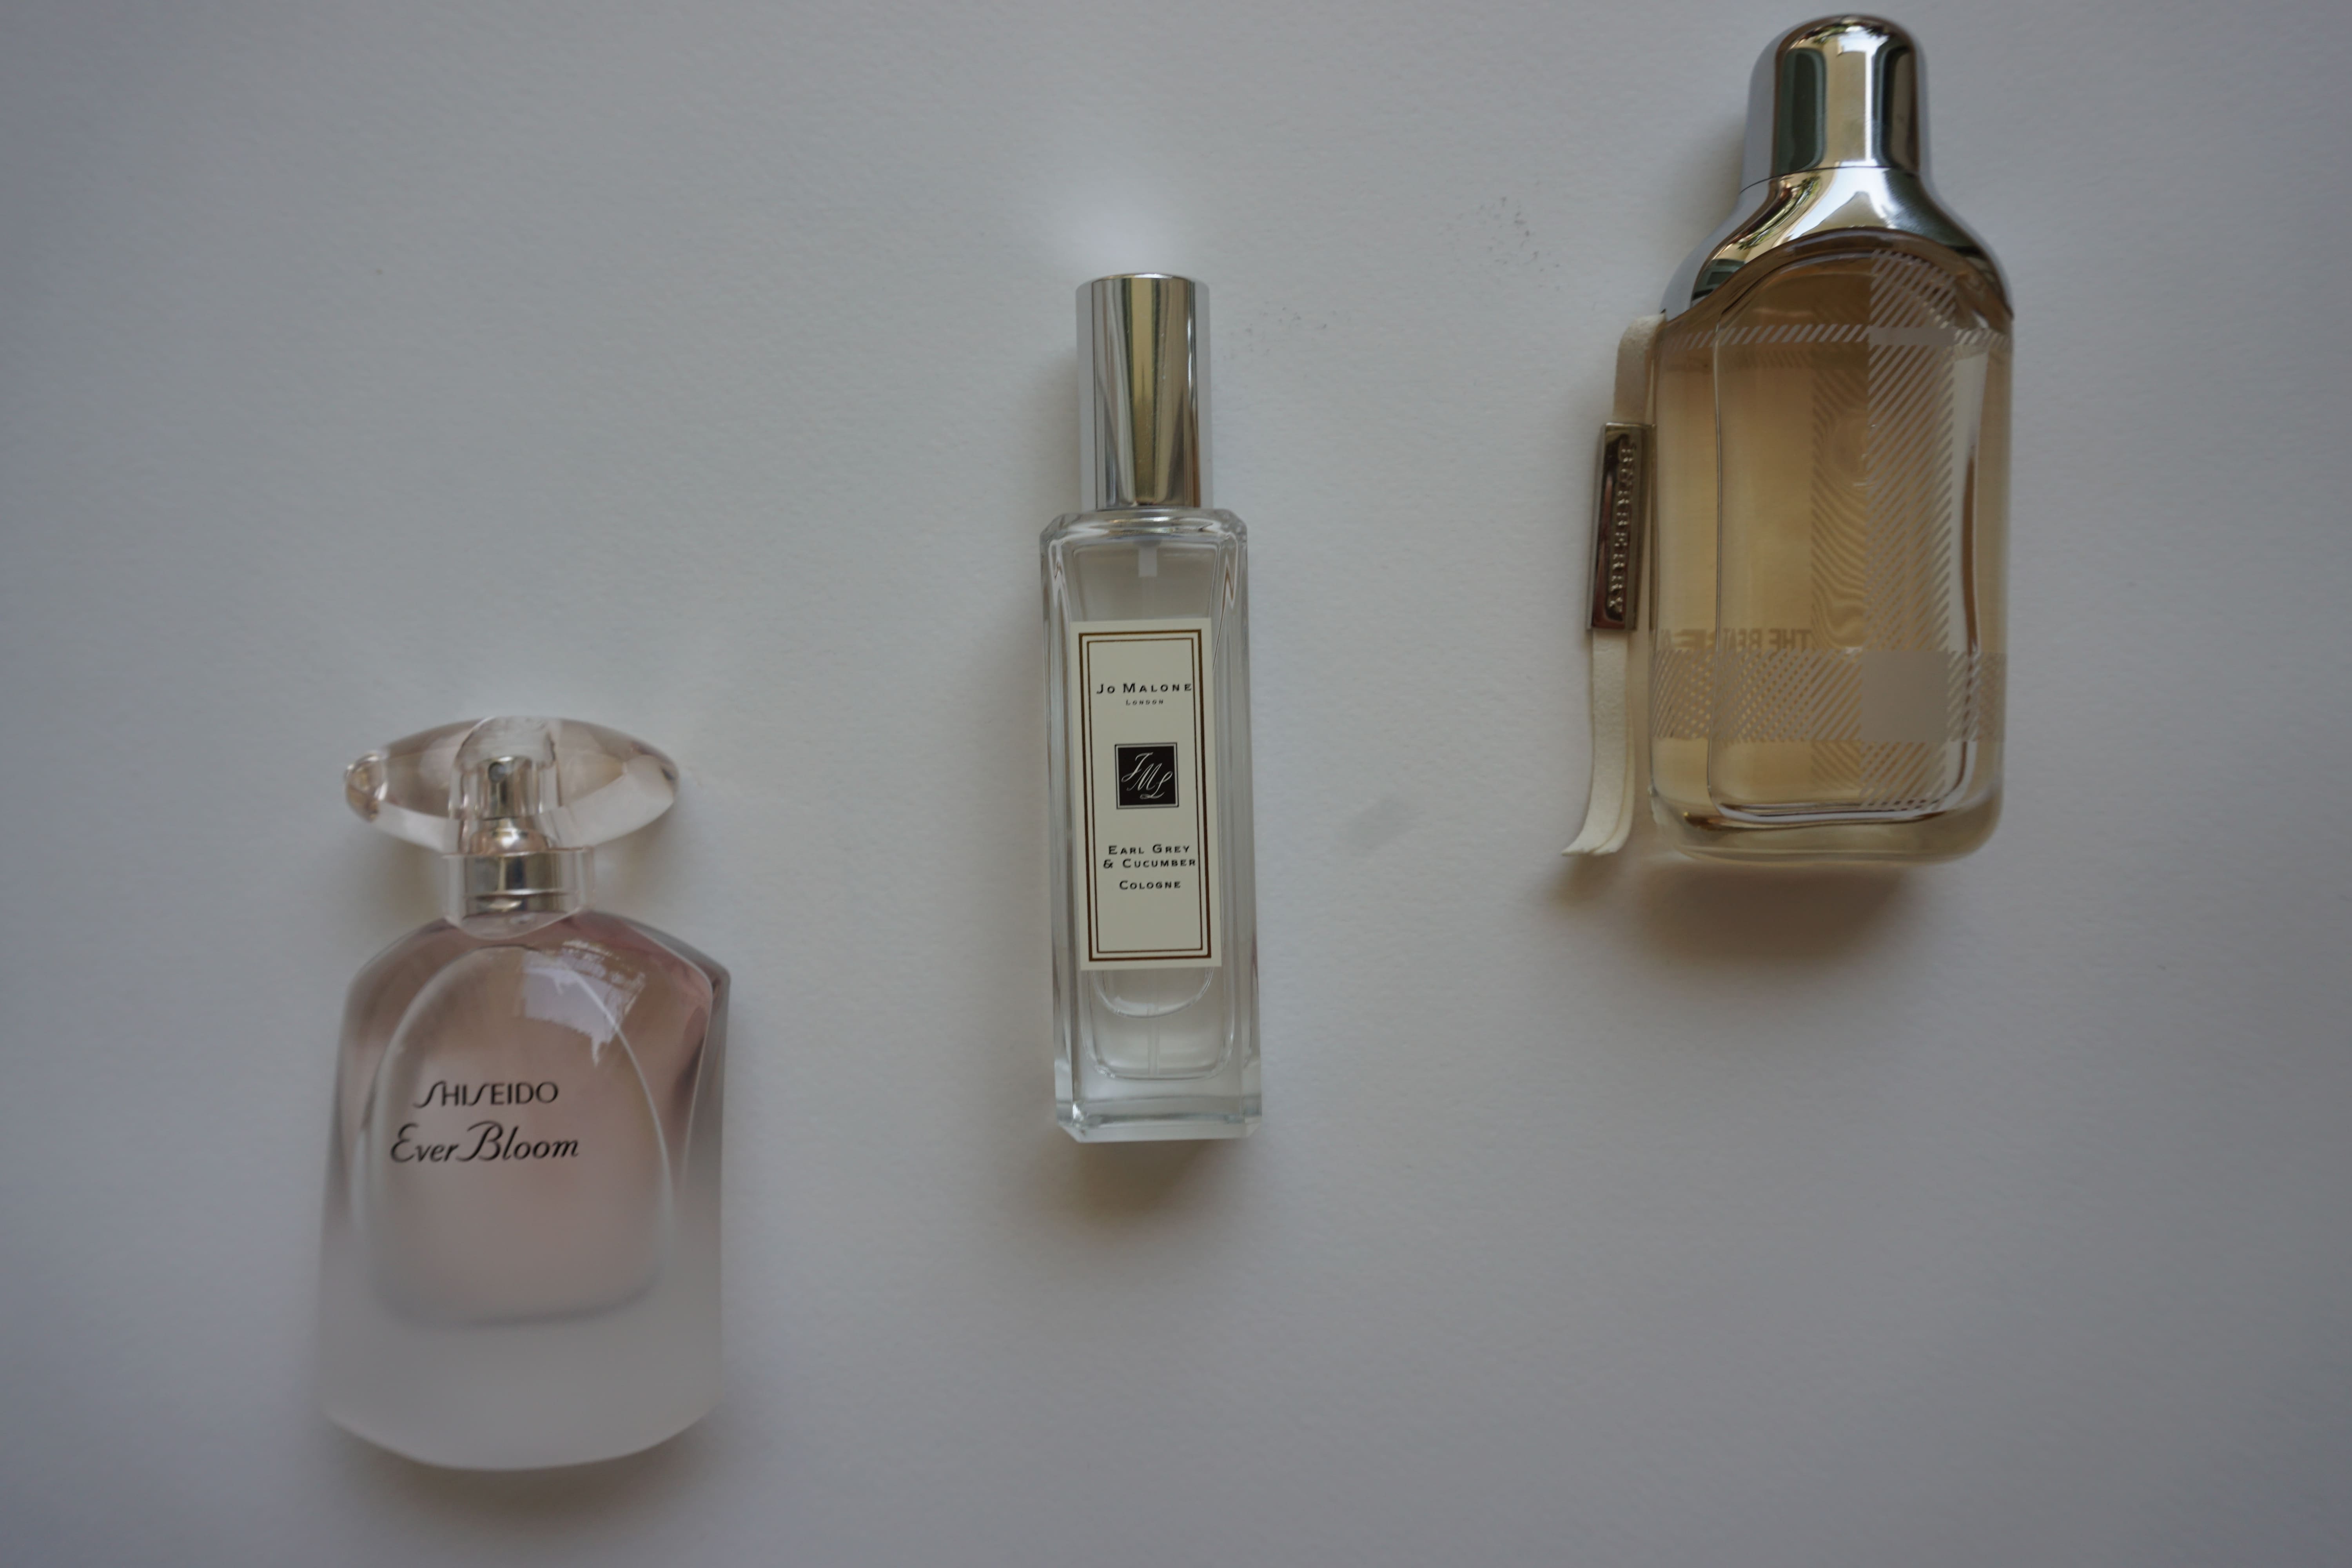 How to find your favourite perfume